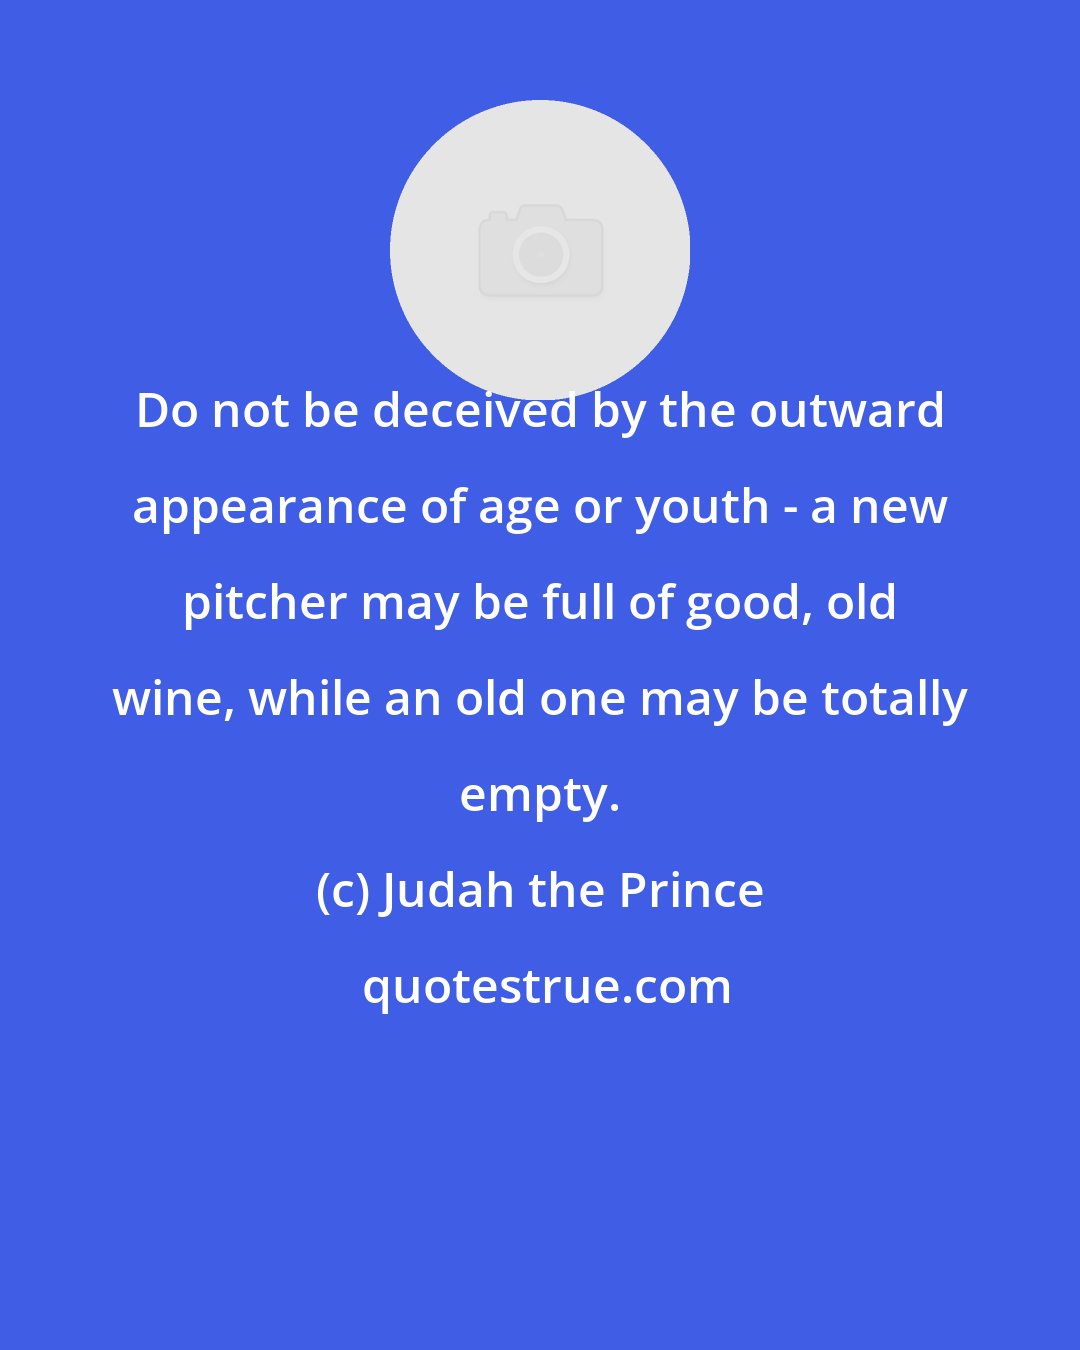 Judah the Prince: Do not be deceived by the outward appearance of age or youth - a new pitcher may be full of good, old wine, while an old one may be totally empty.